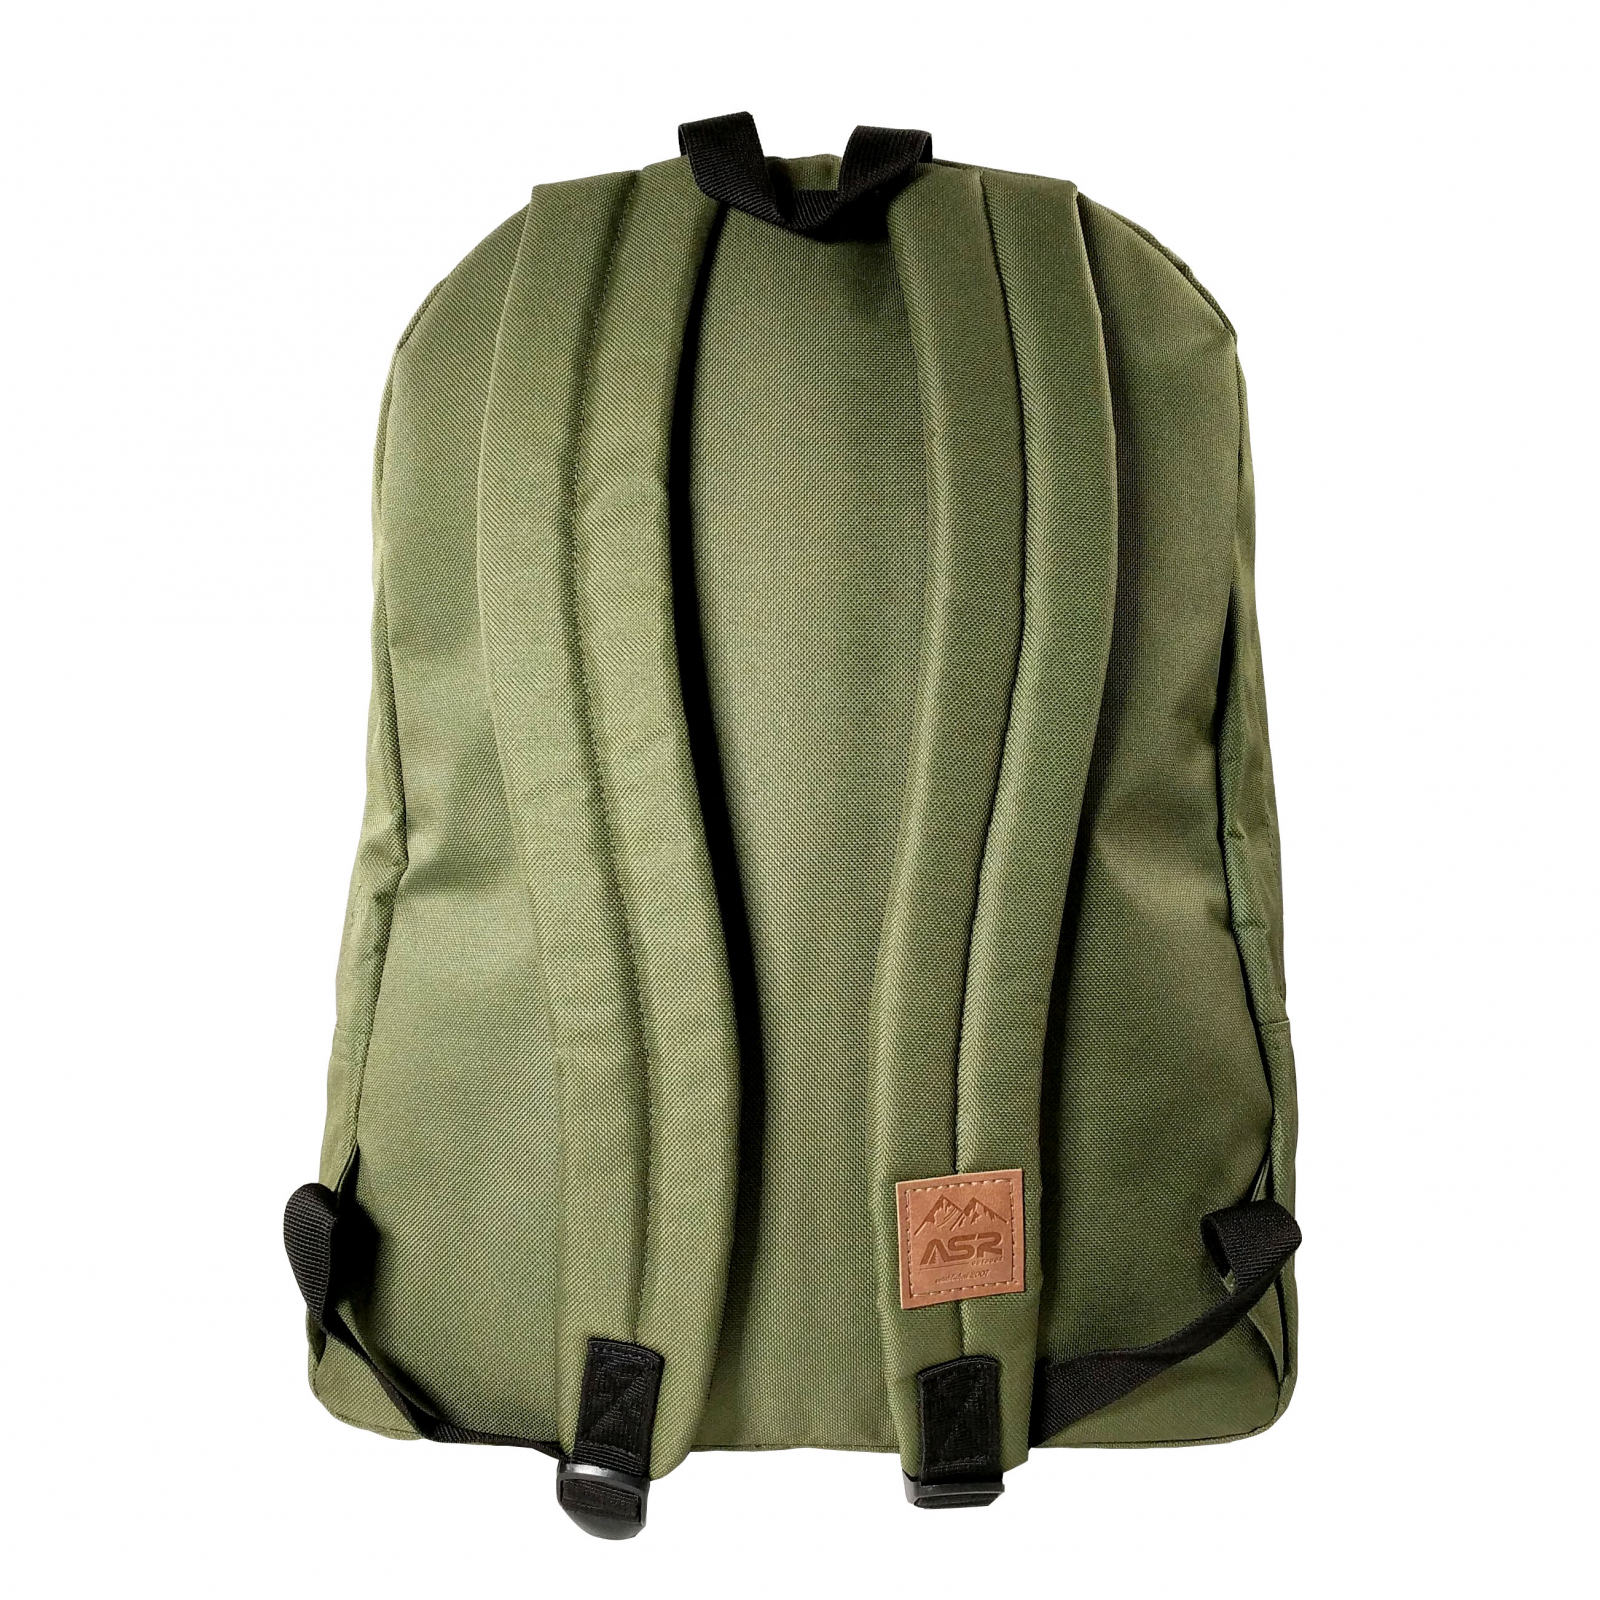 ASR Outdoor 19L Griptape Backpack Dual Zip Two Tone Navy OD Green - image 5 of 7